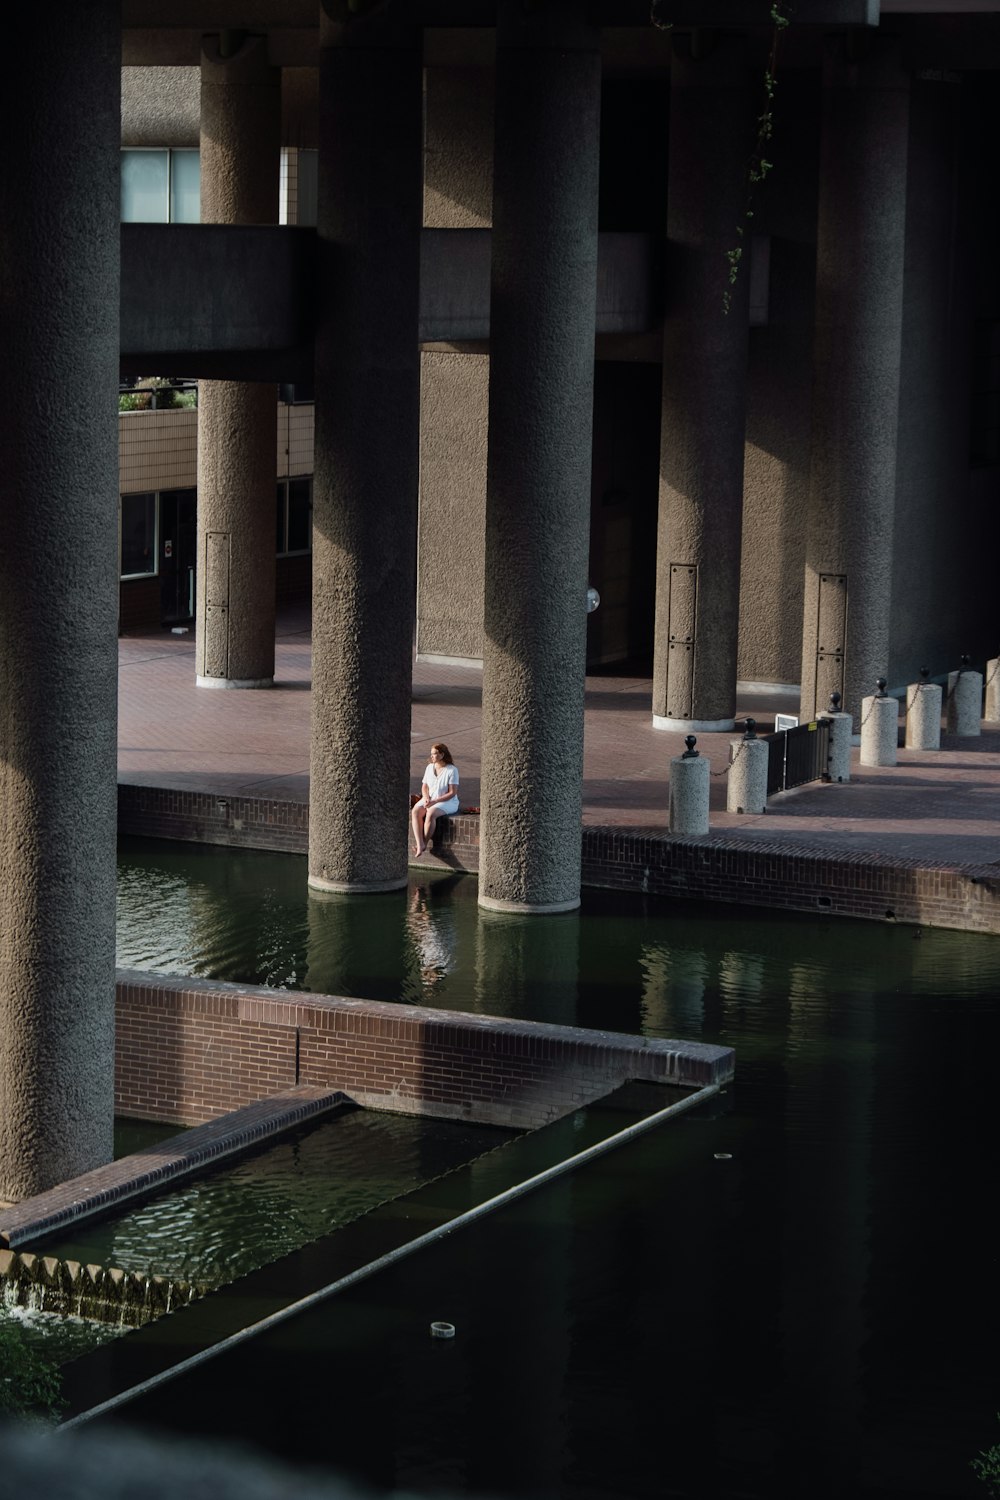 a person sitting on a bench in a body of water